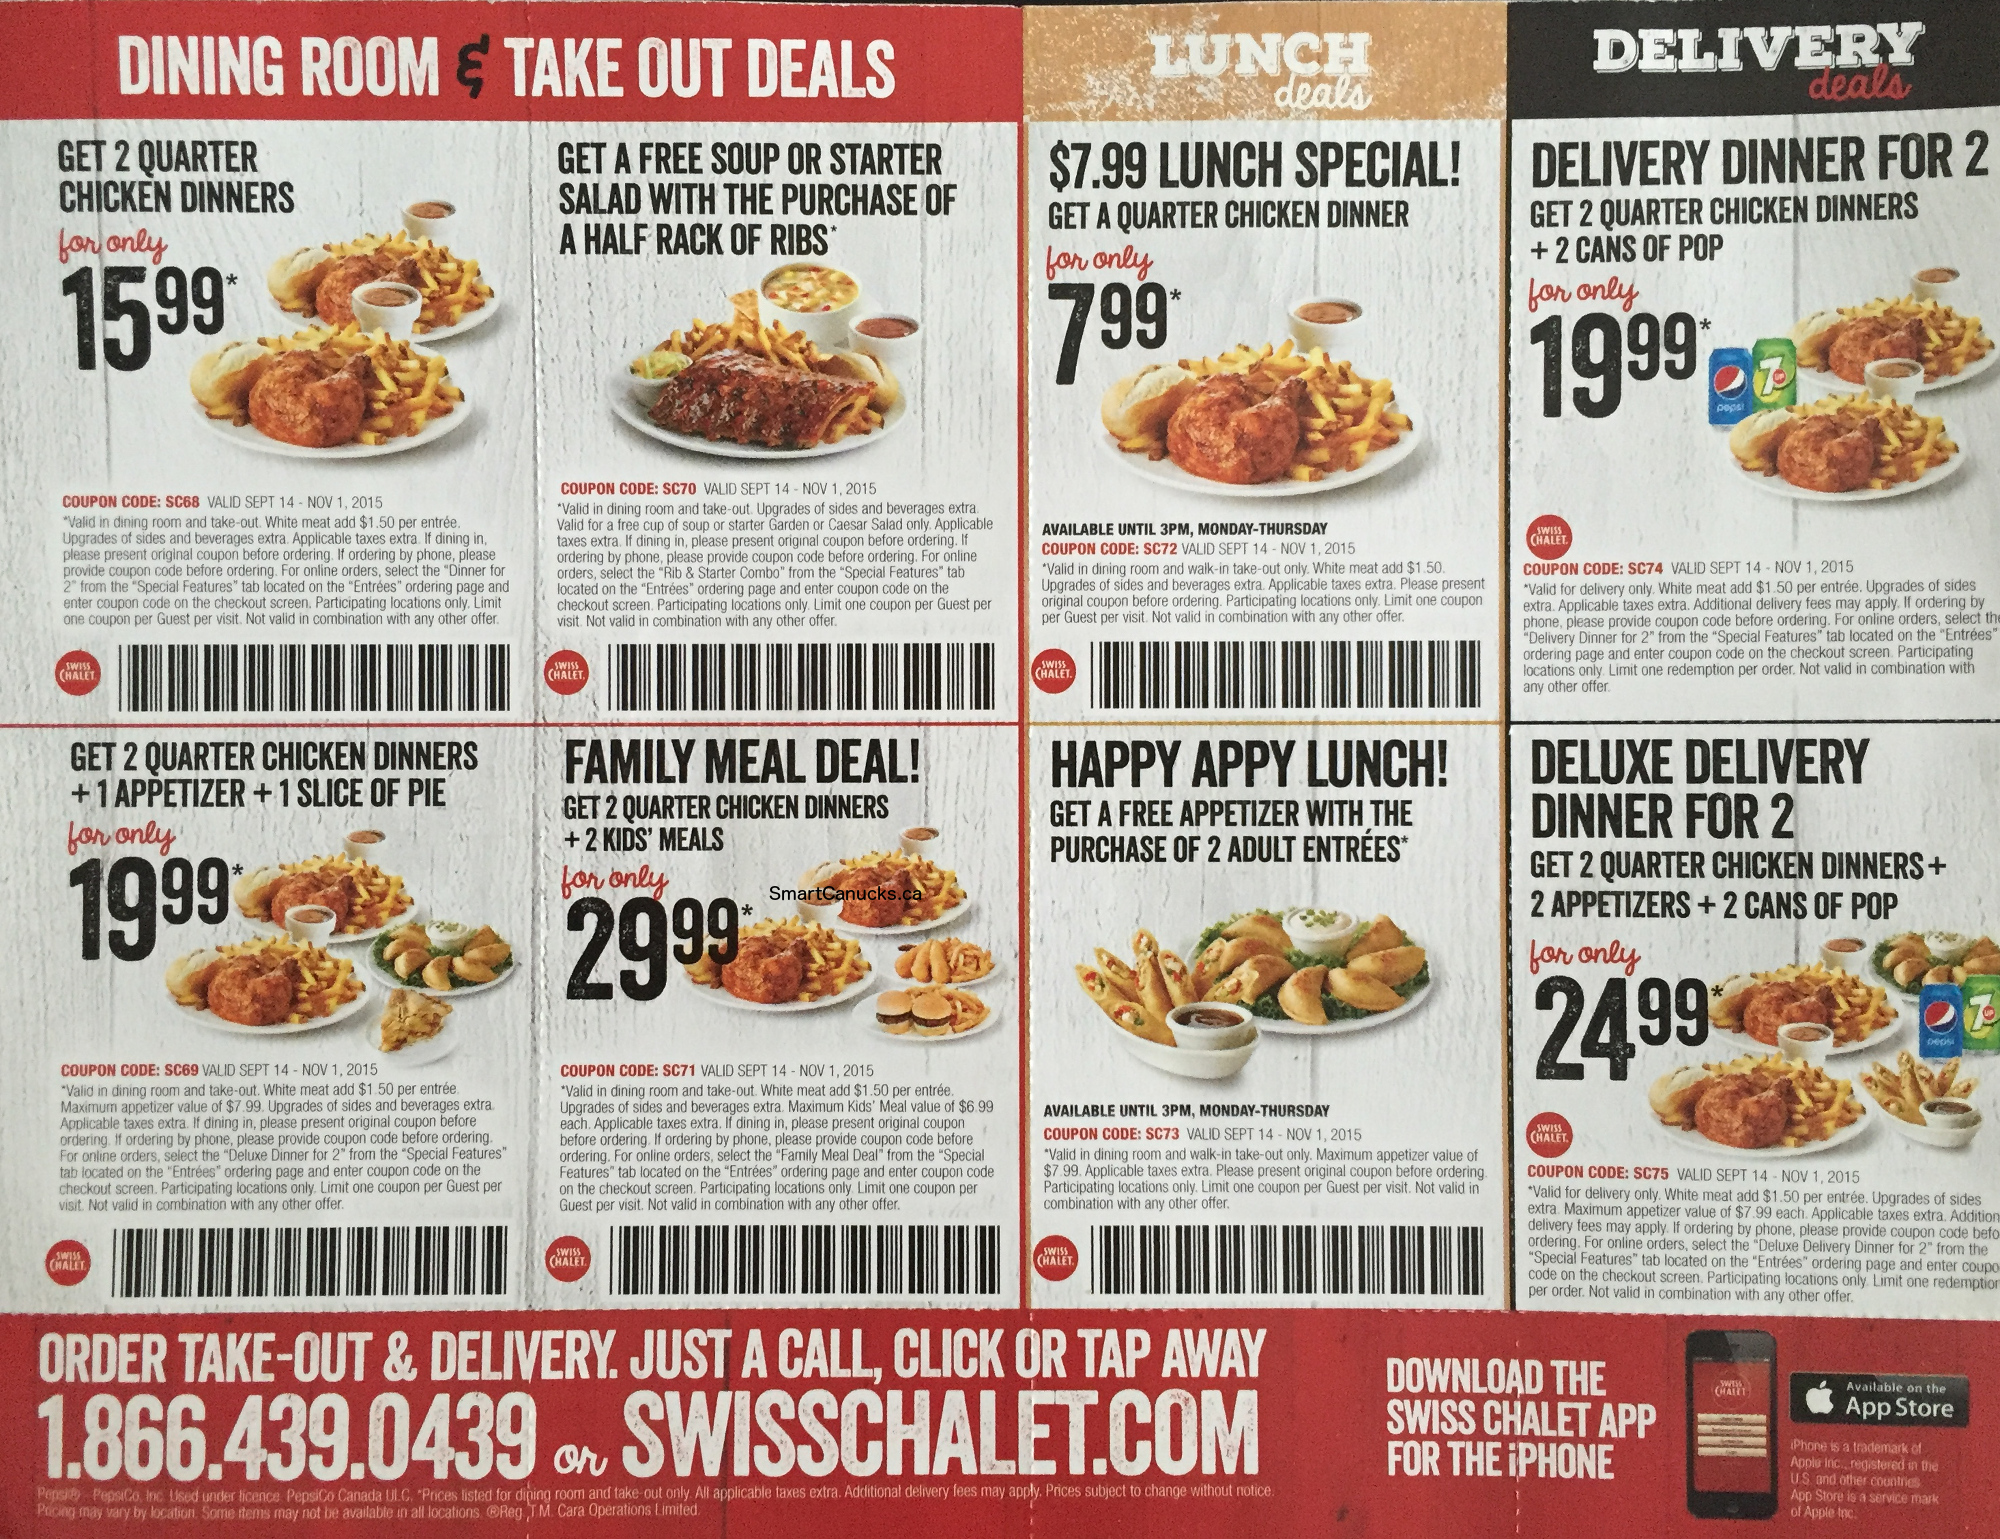 Swiss Chalet Canada Coupons And Promo Codes Get 2 Quarter